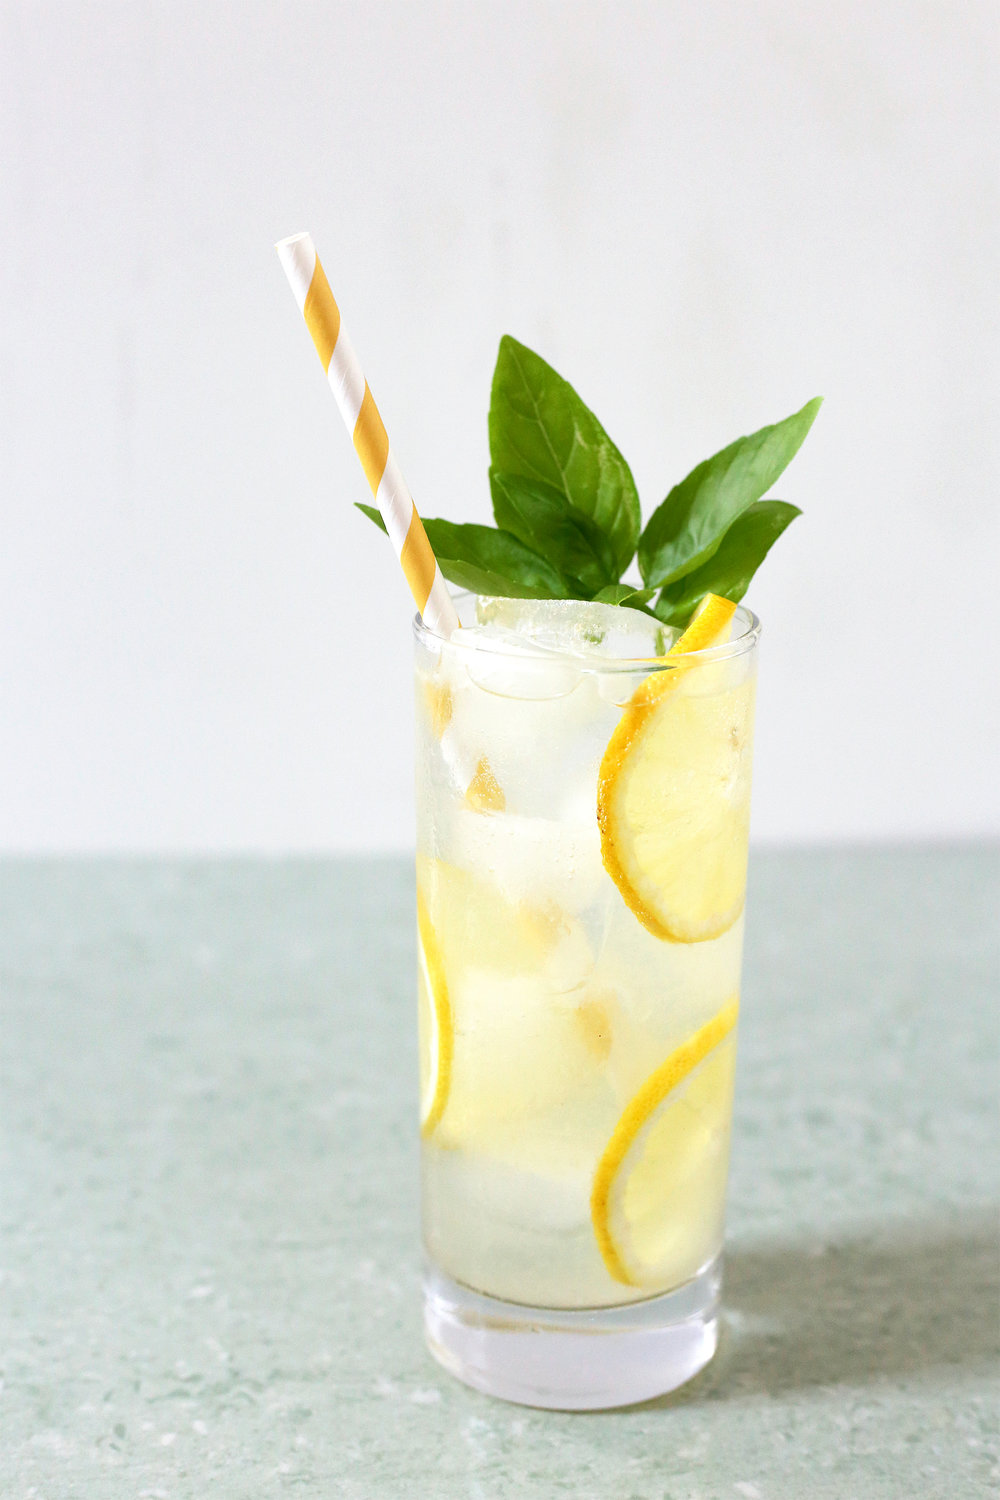 Summer in a glass: Boozy & Bubbly Basil Lemonade. Get the recipe: unusuallylovely.com